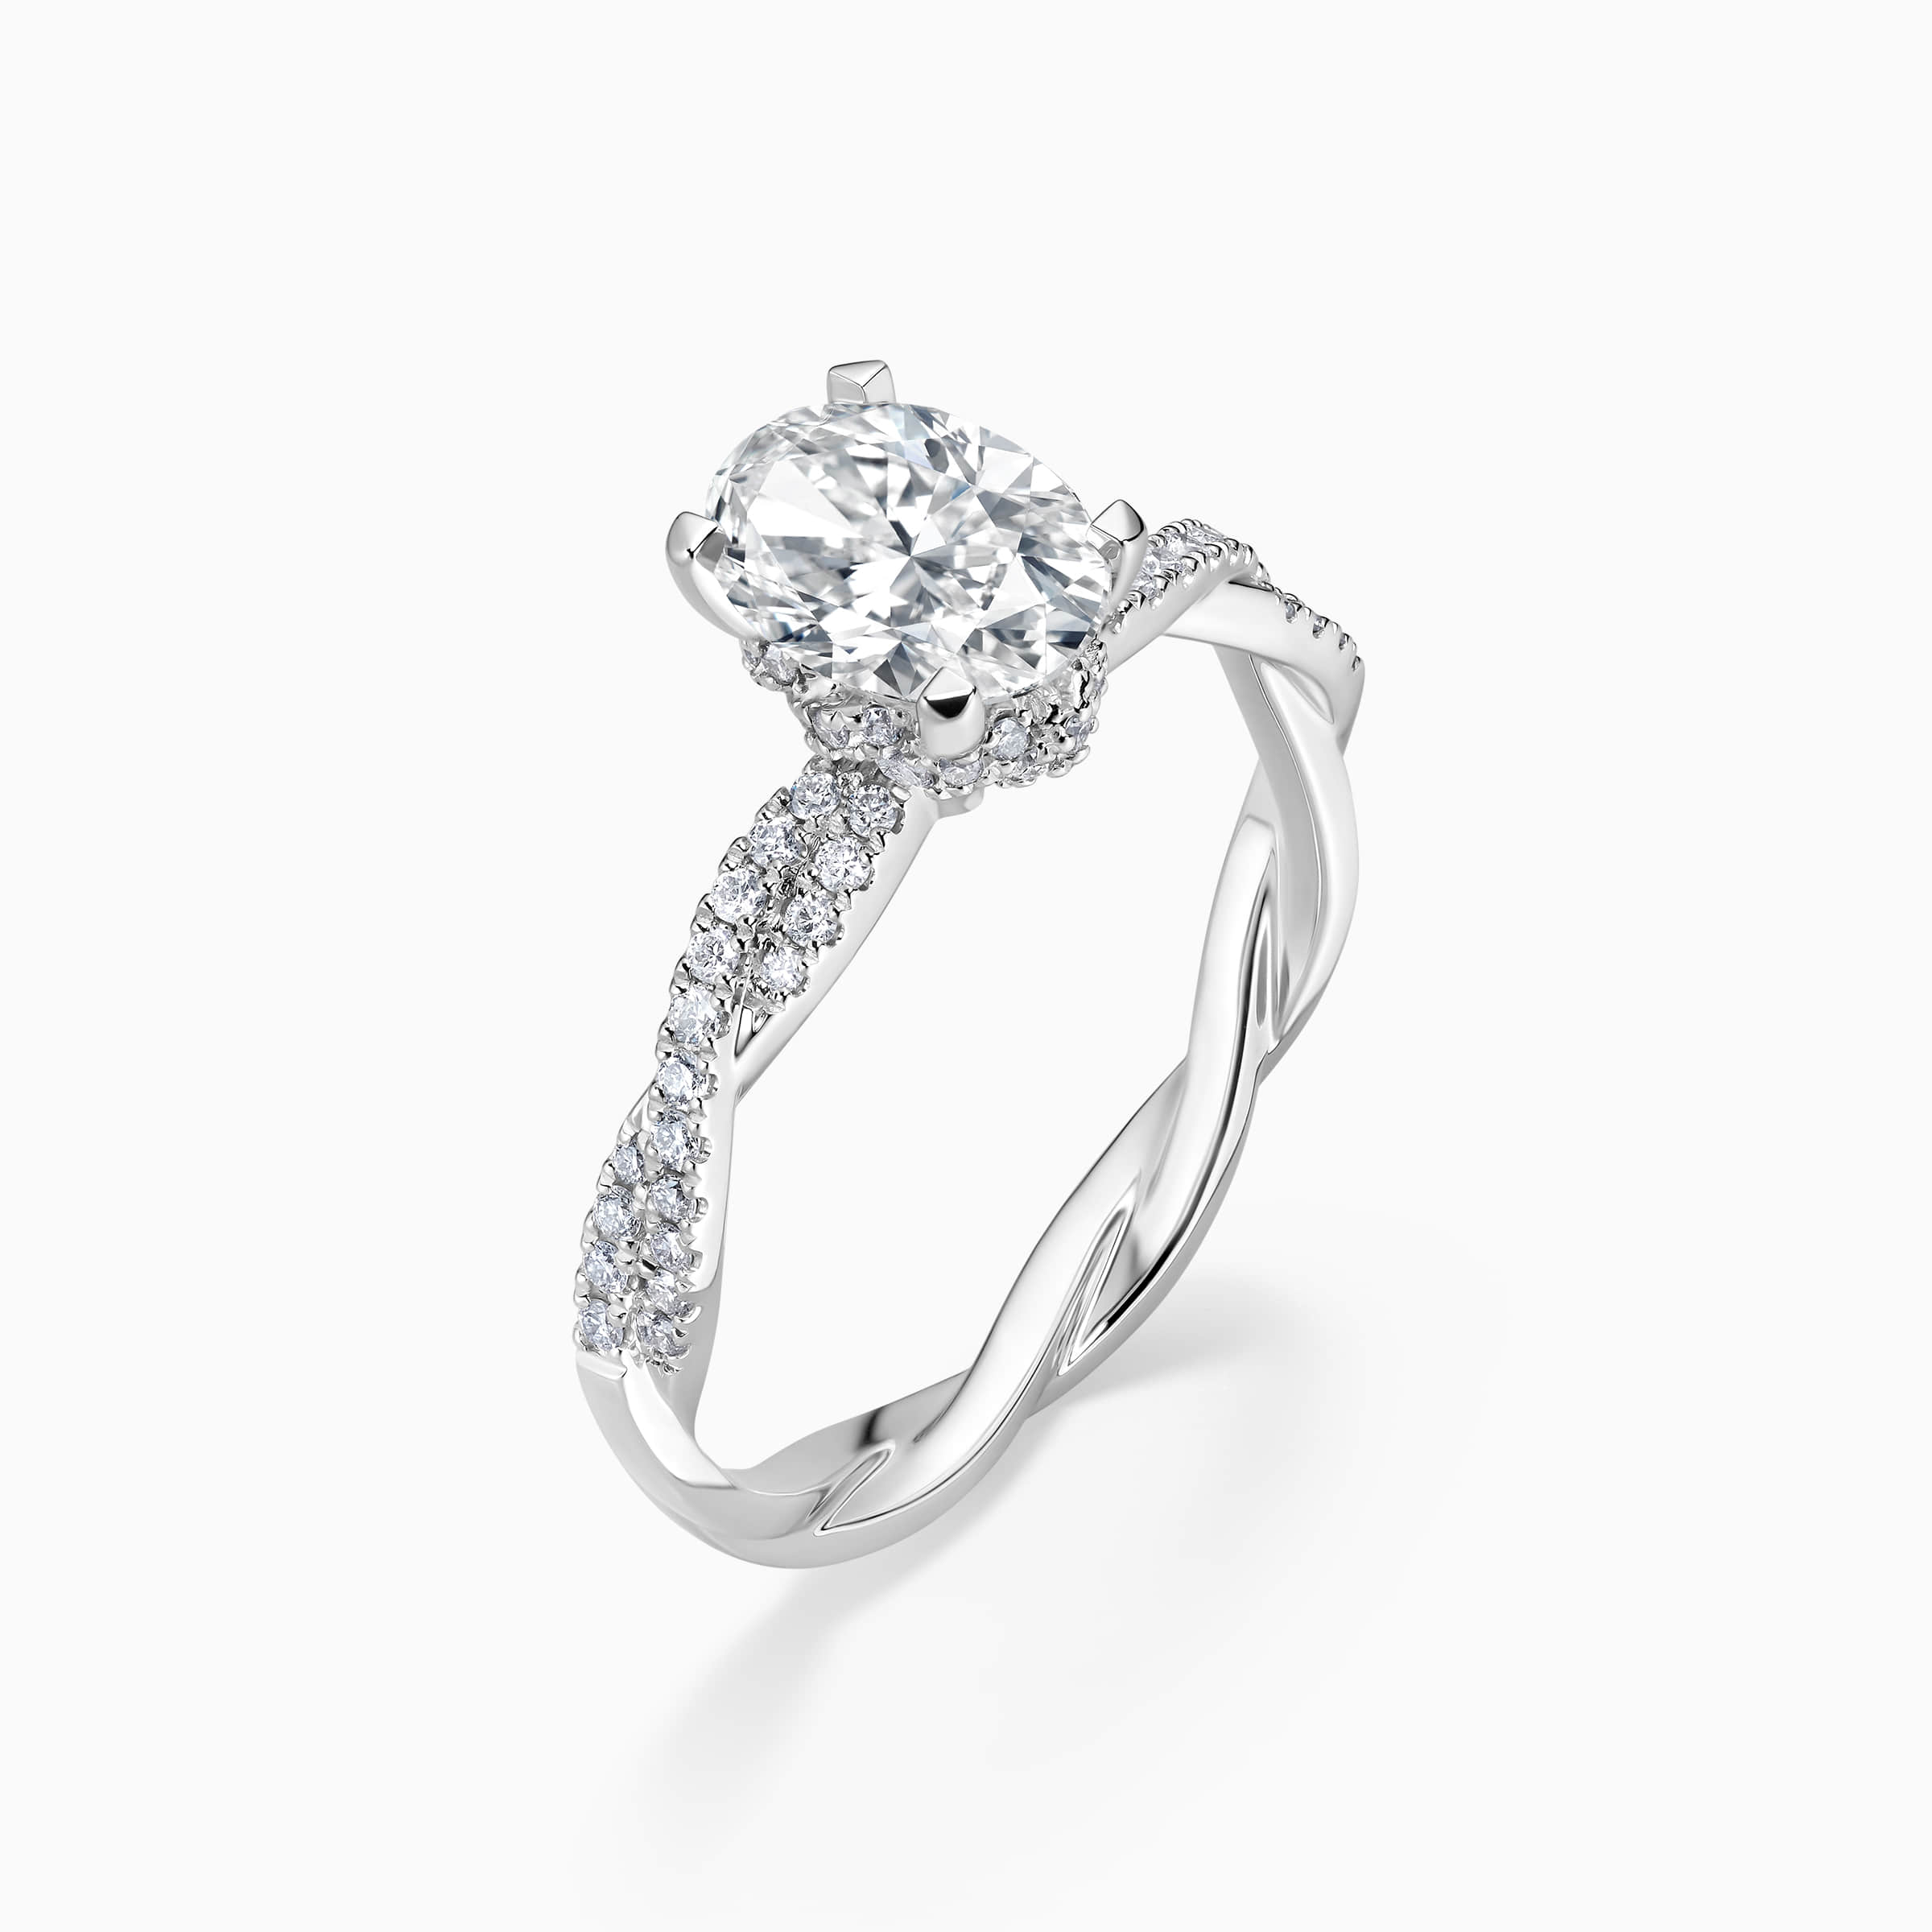 Darry Ring oval diamond engagement ring top view